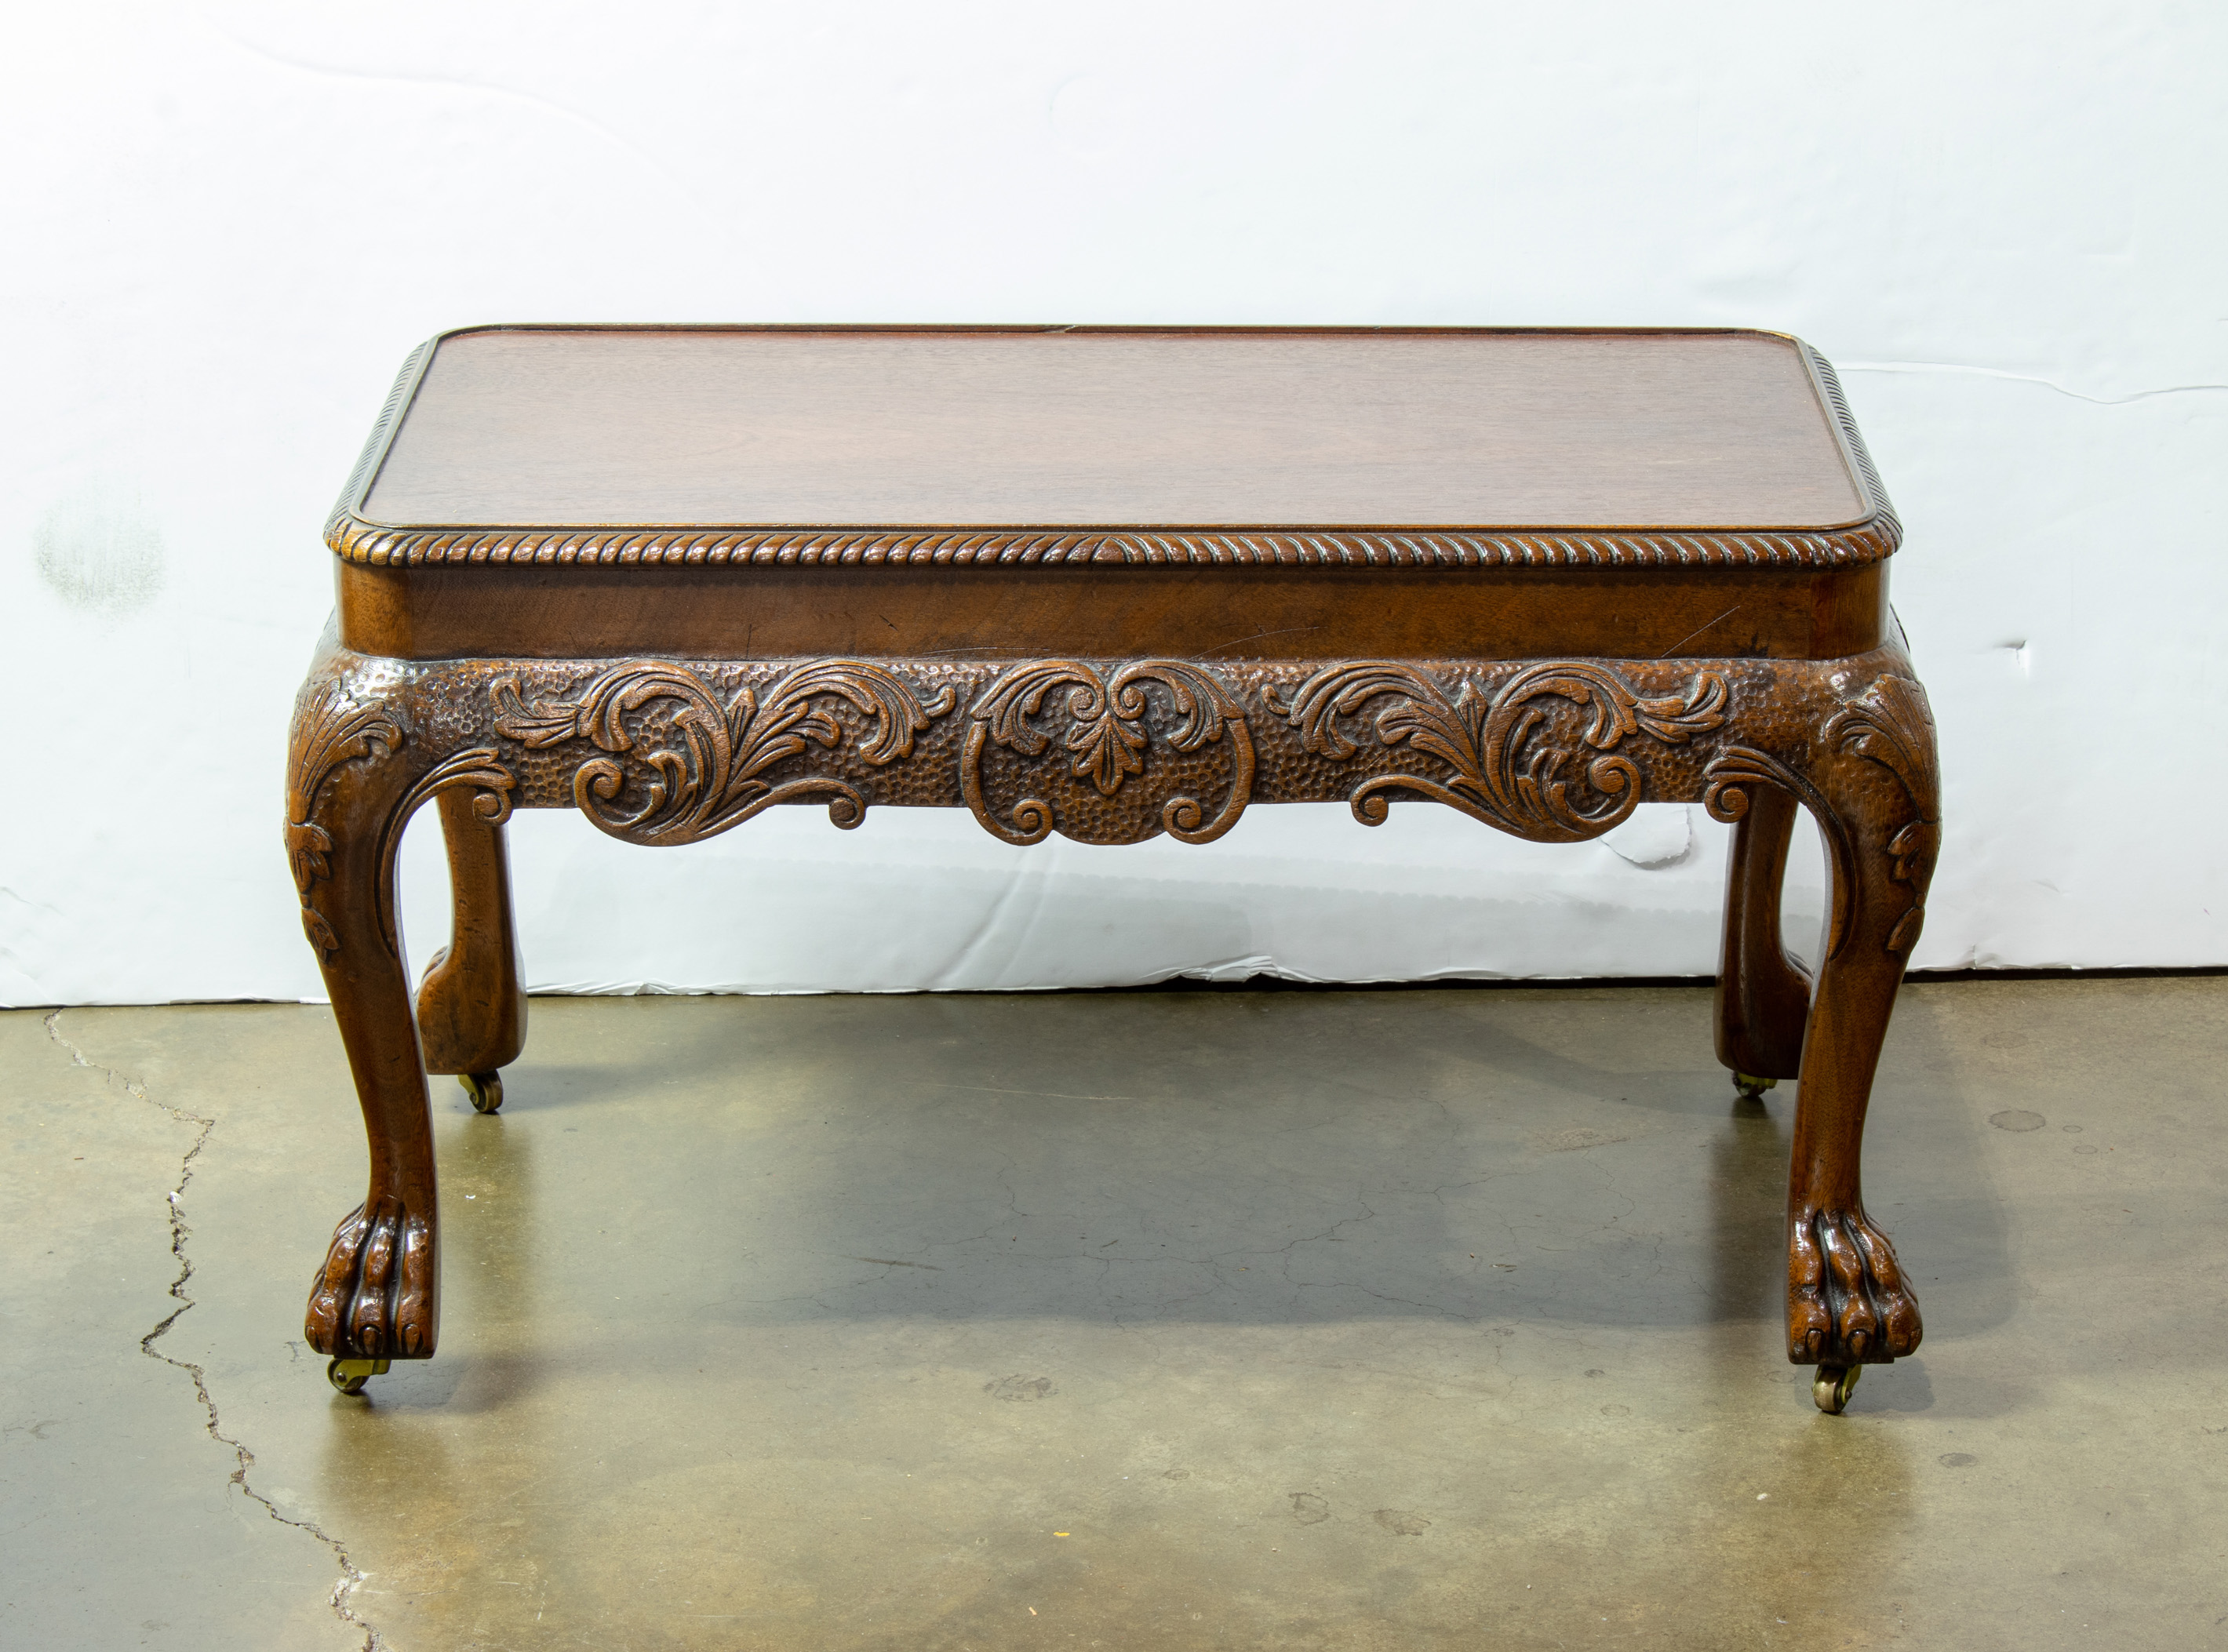 A CLASSICAL STYLE MAHOGANY BENCH 3a370a